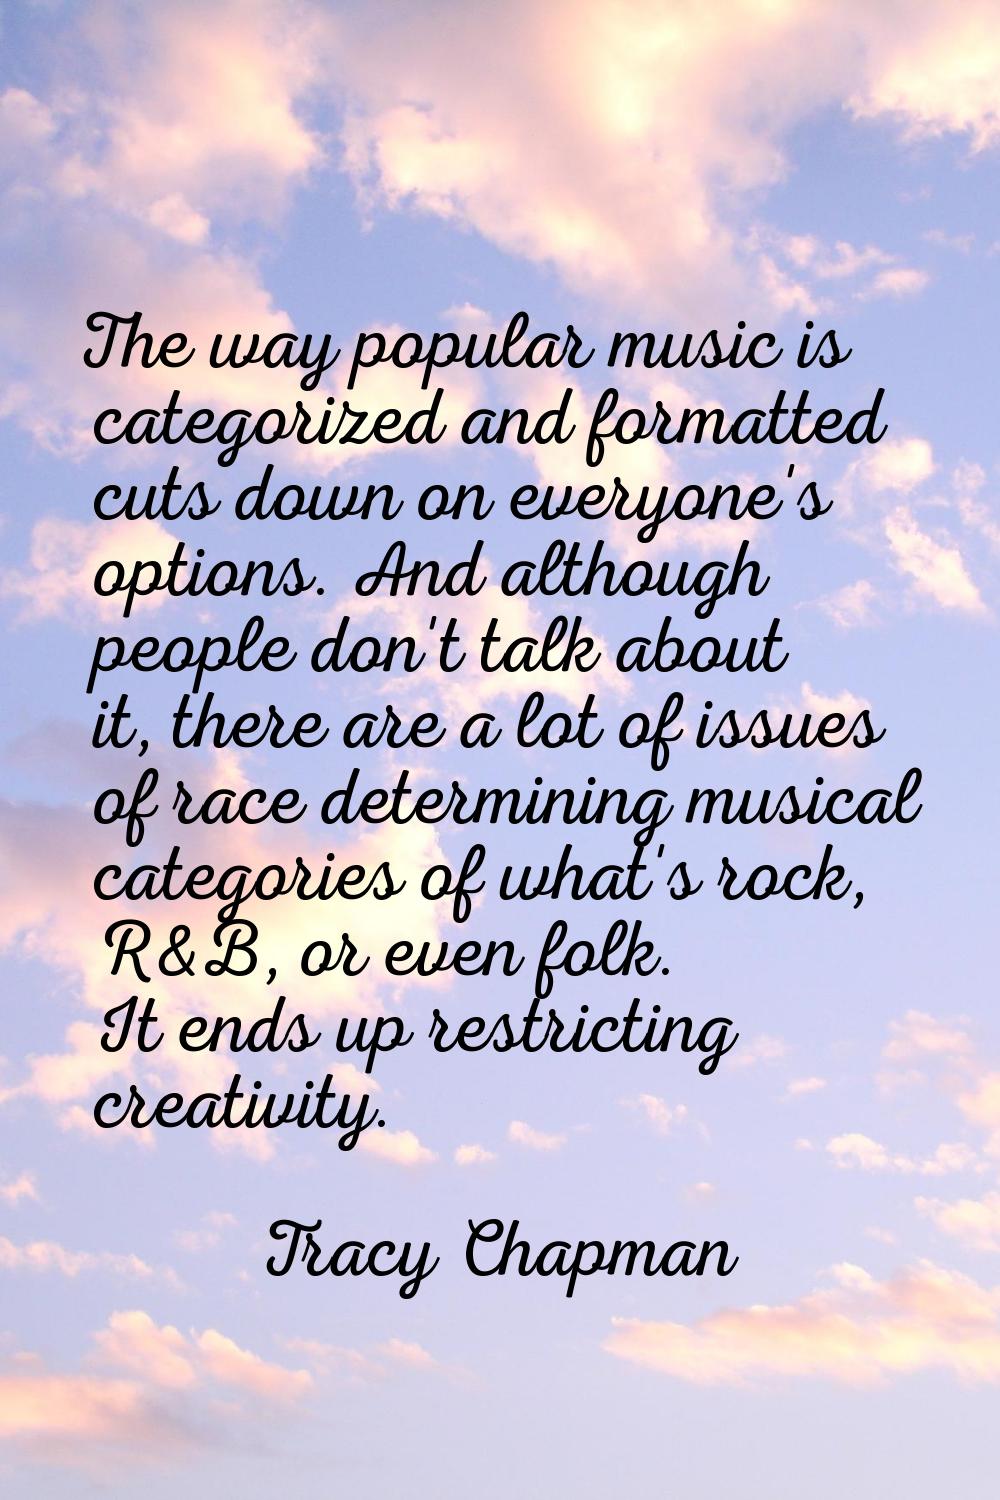 The way popular music is categorized and formatted cuts down on everyone's options. And although pe